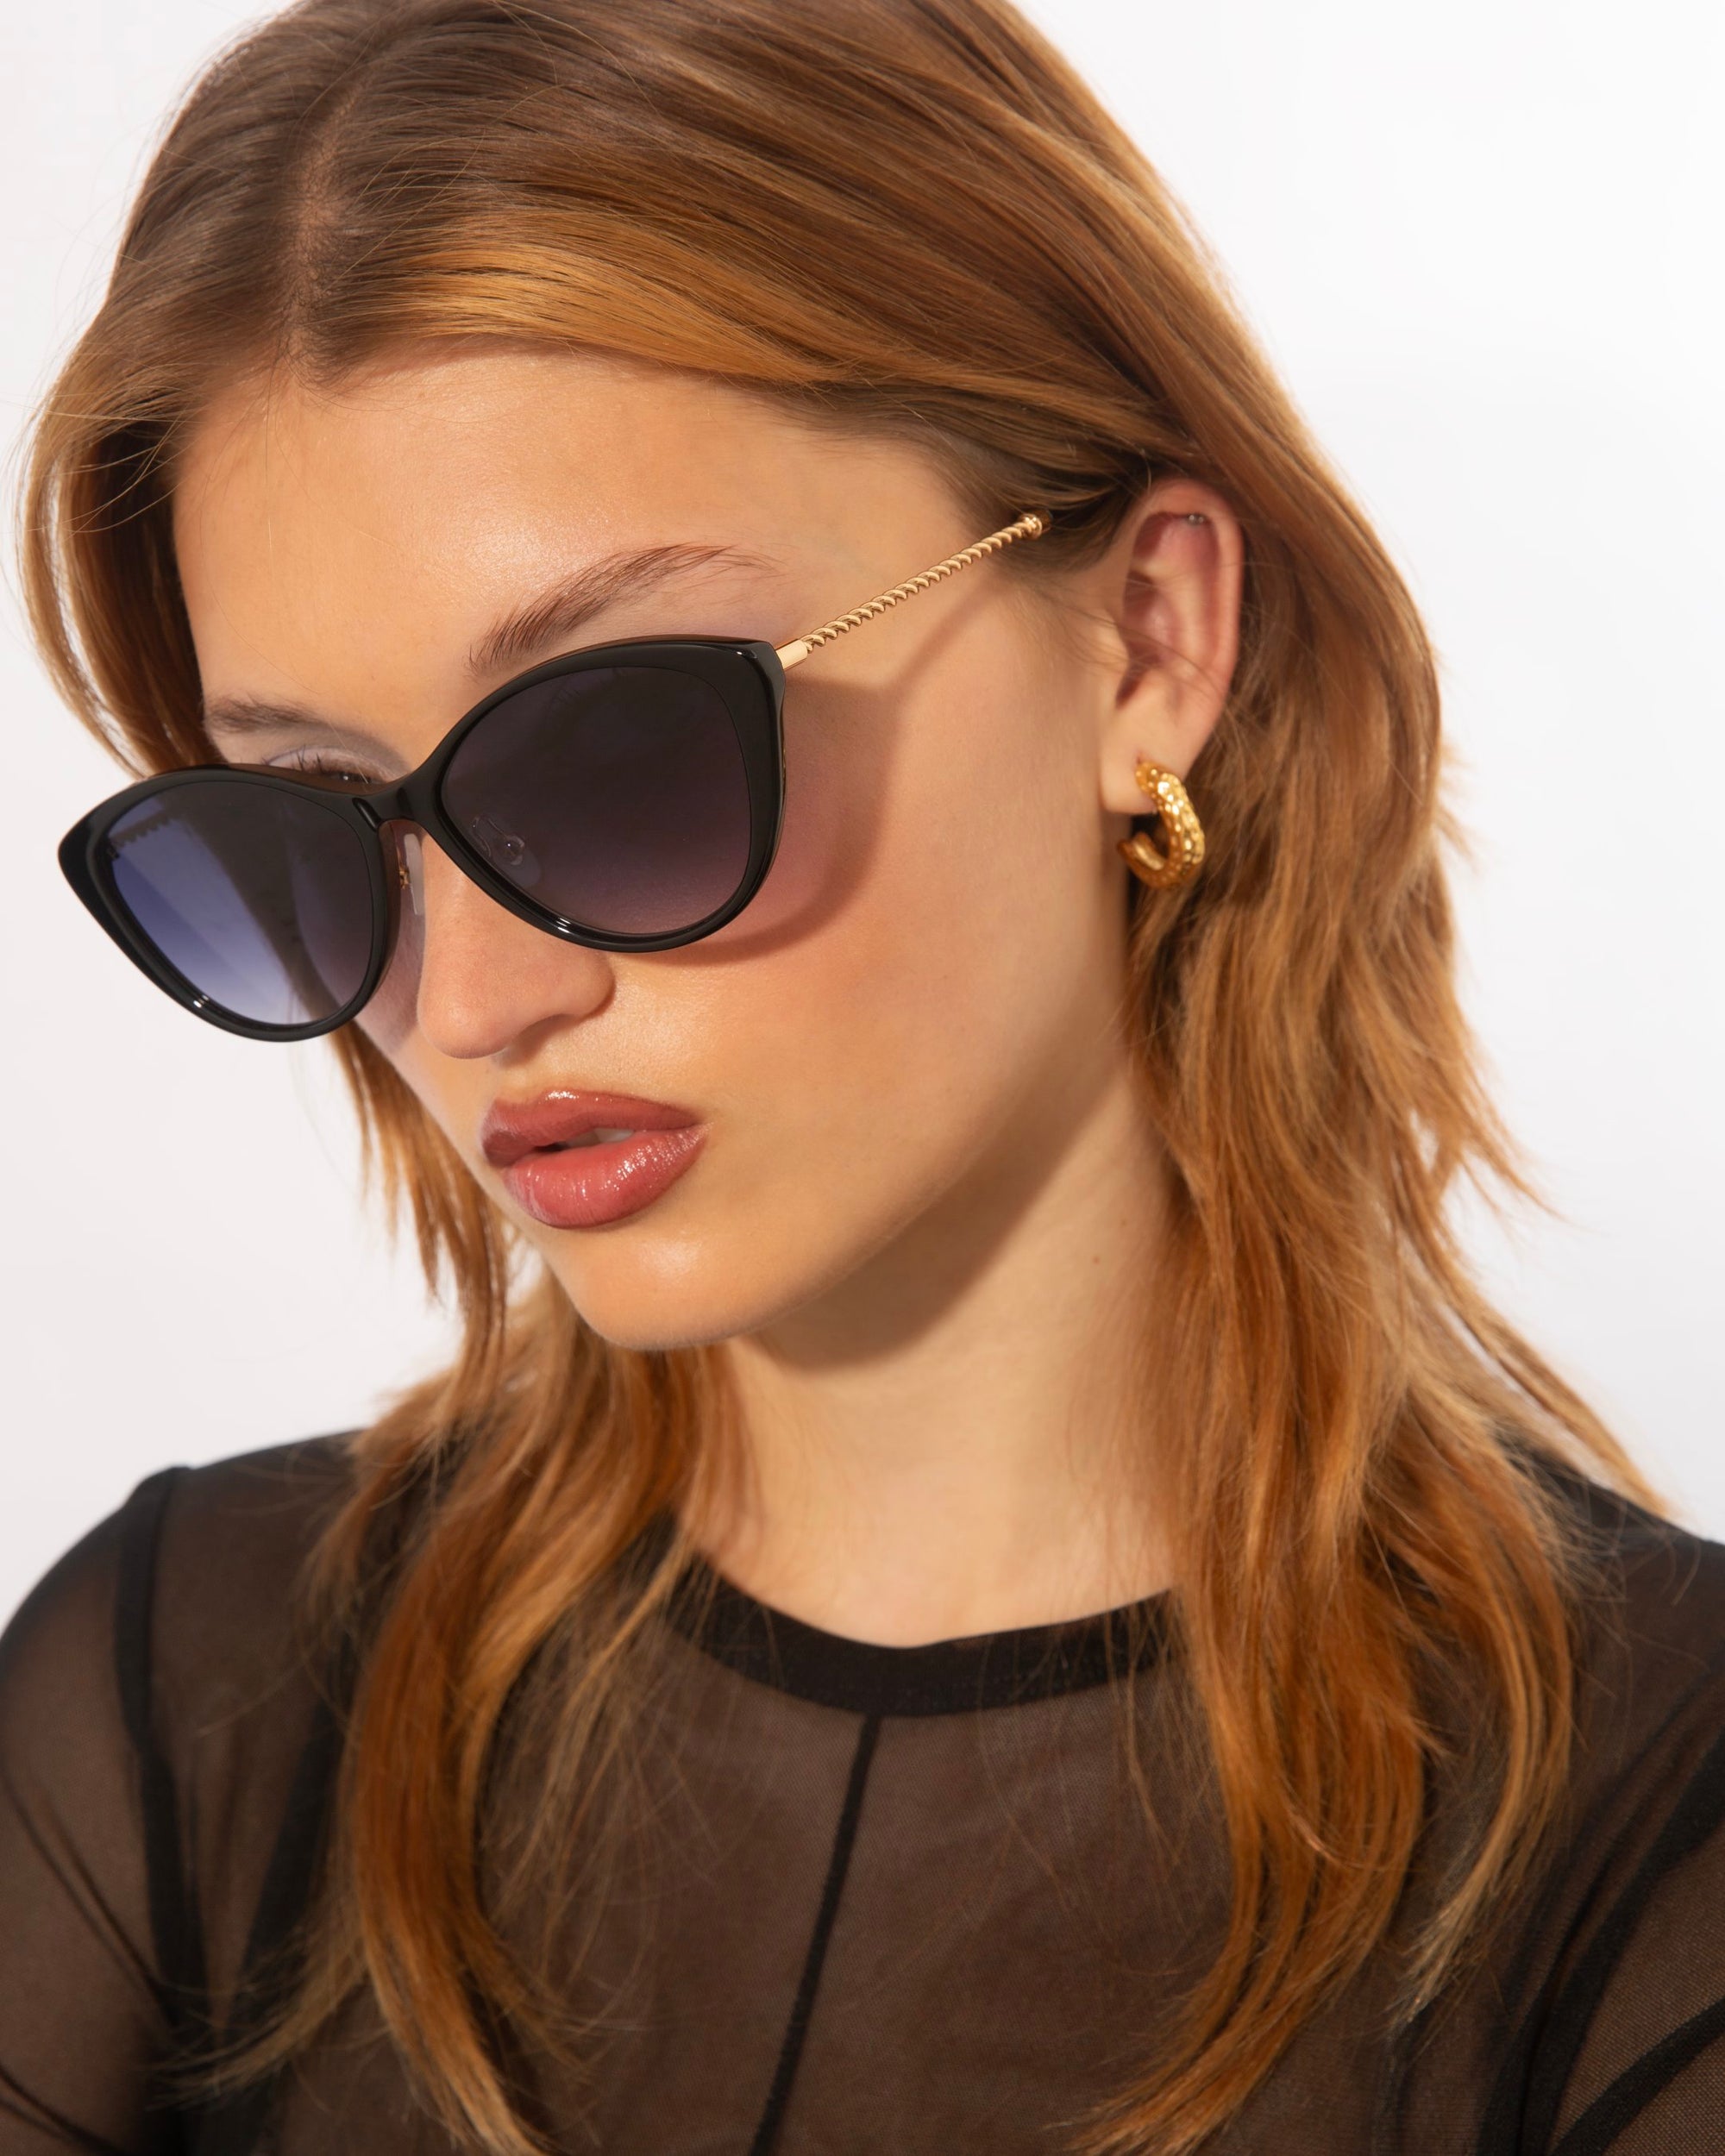 A person with long, auburn hair and wearing a black sheer top and black cat-eye sunglasses featuring jade-stone nose pads by For Art&#39;s Sake® Perla II is looking down. They have gold hoop earrings and a slightly serious expression. The background is plain white.